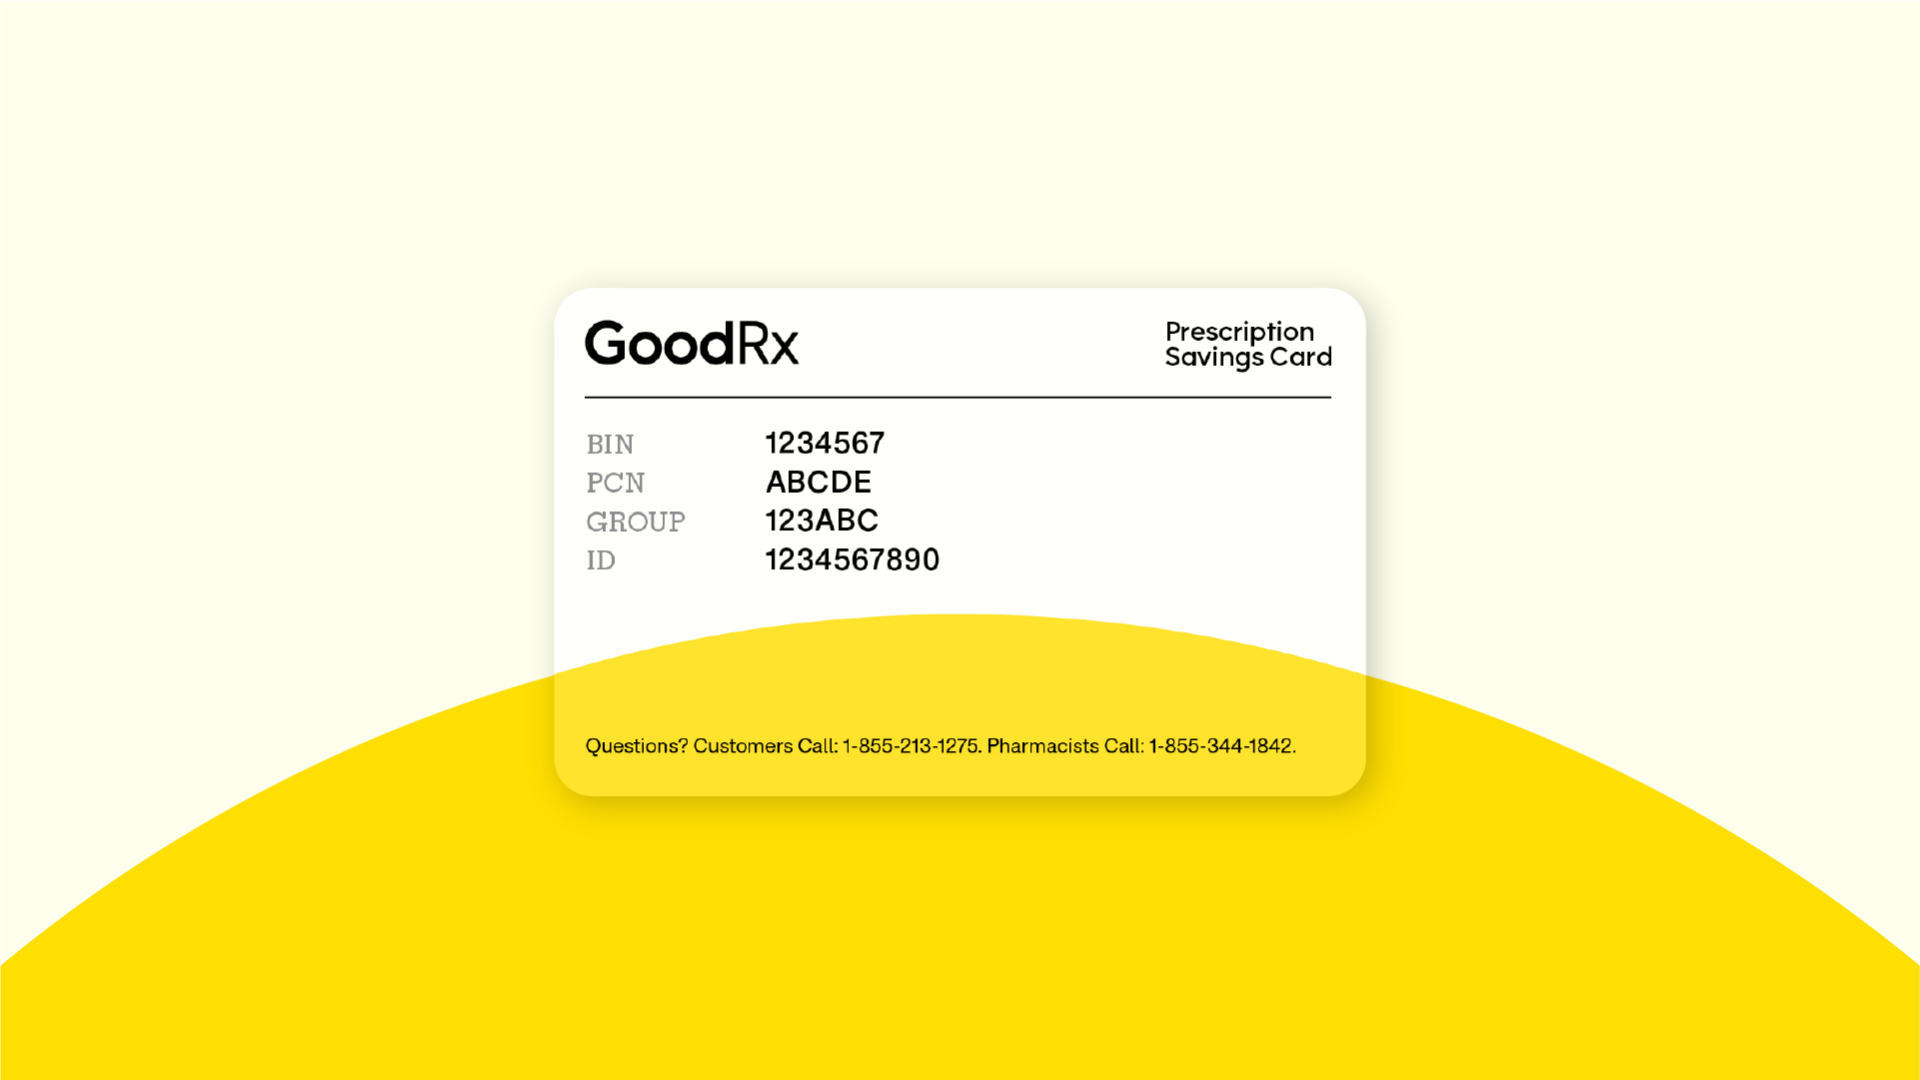 Deeper Discounts on Over 500 Drugs with GoodRx Gold - GoodRx